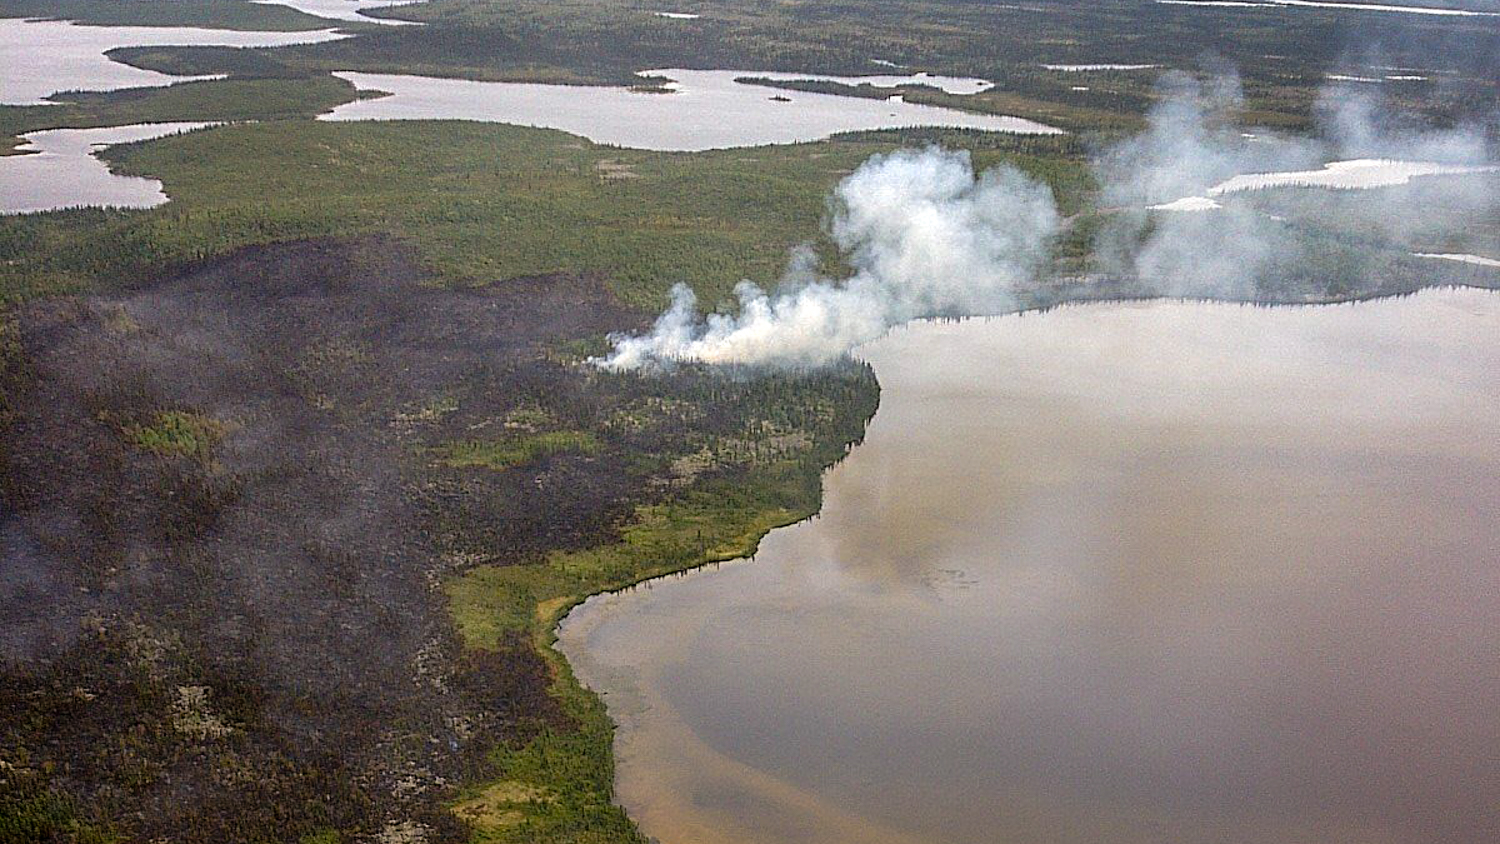 A wildfire burns in the region of Wekweètı̀ in a photo released by the Department of Environment and Natural Resources on July 13, 2018